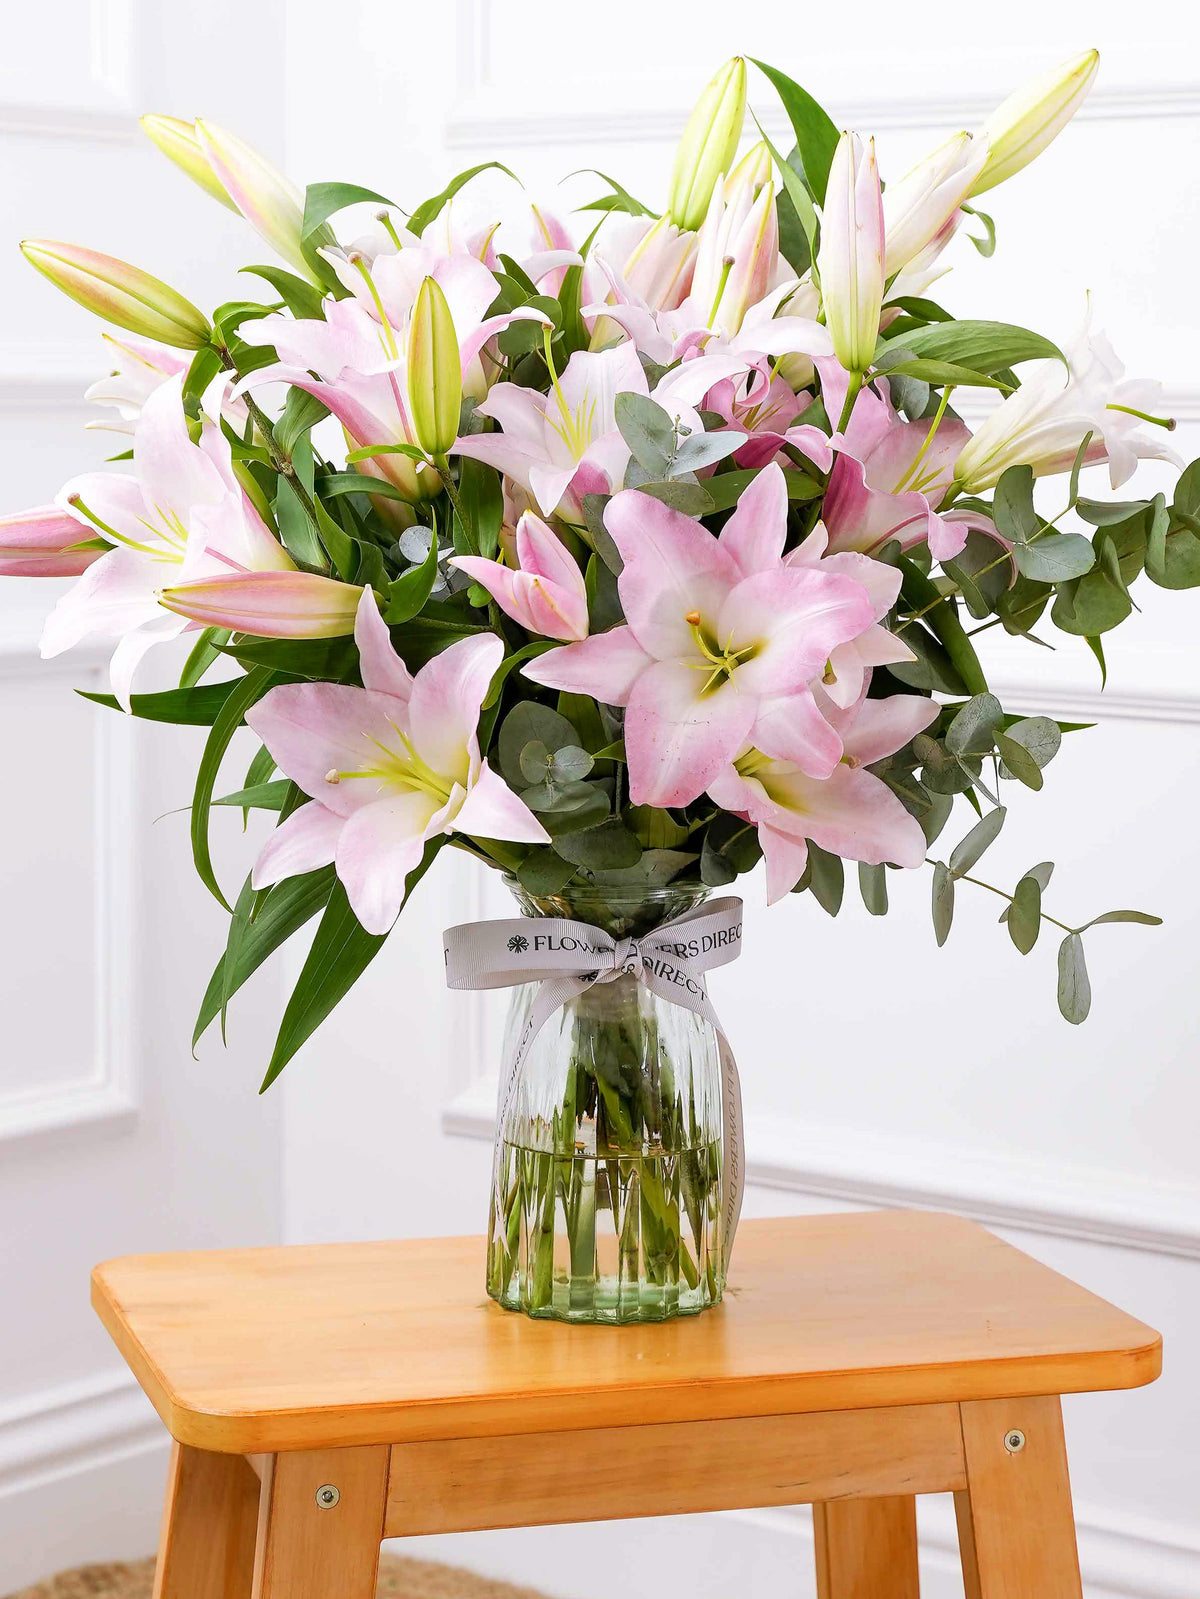 Sympathy Pink Lily in a vase